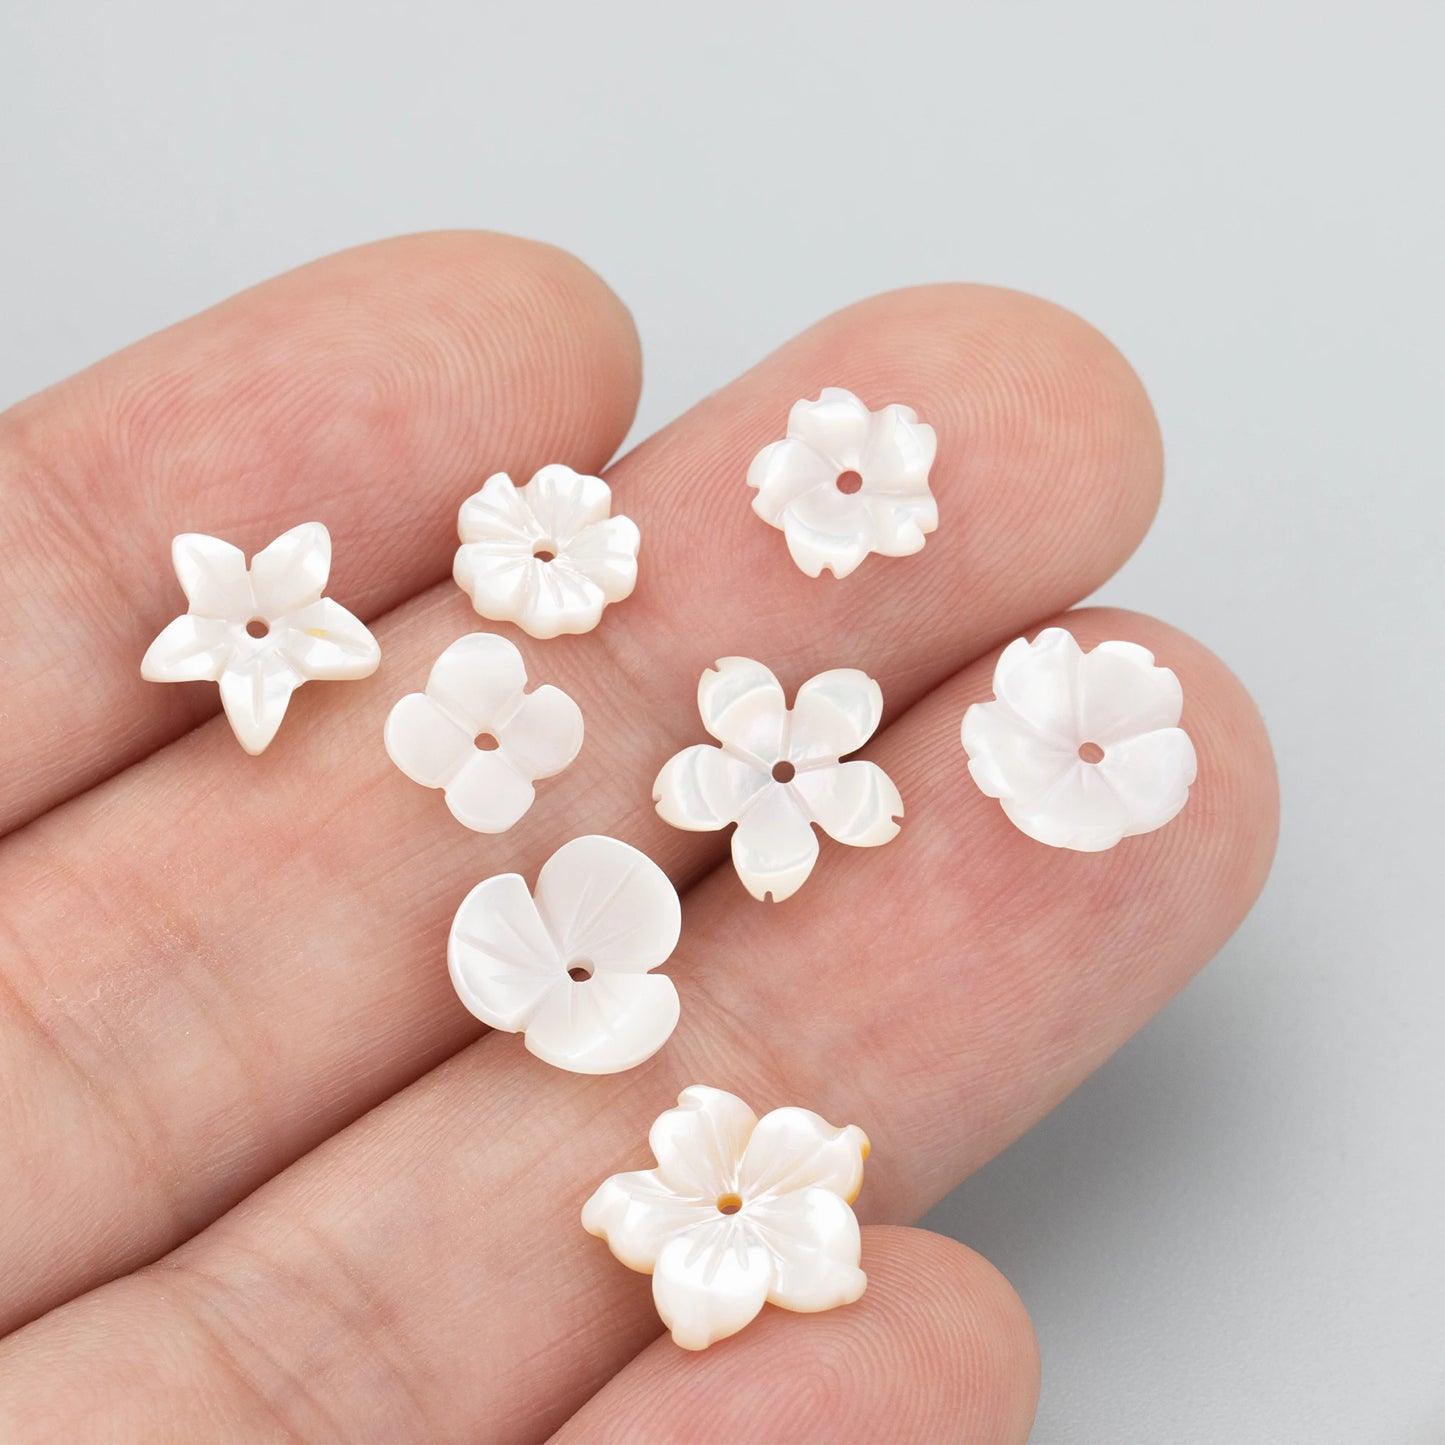 GUFEATHER MD26,jewelry accessories,natural shells,flower shape,charms,diy flower cap,jewelry making,diy pendants,10pcs/lot